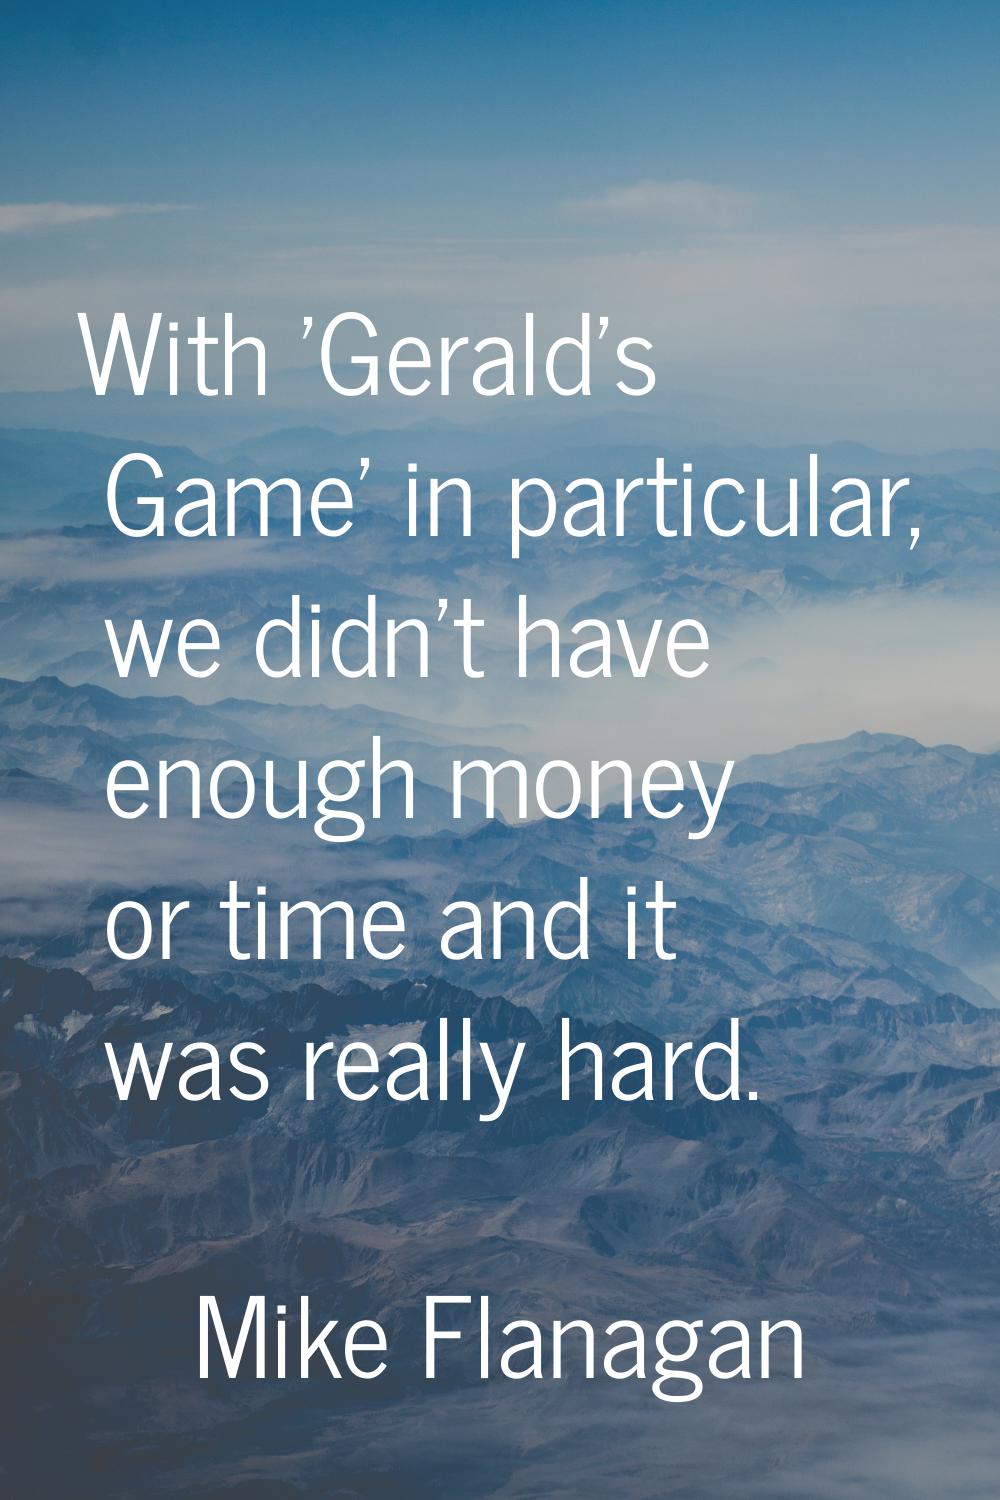 With 'Gerald's Game' in particular, we didn't have enough money or time and it was really hard.